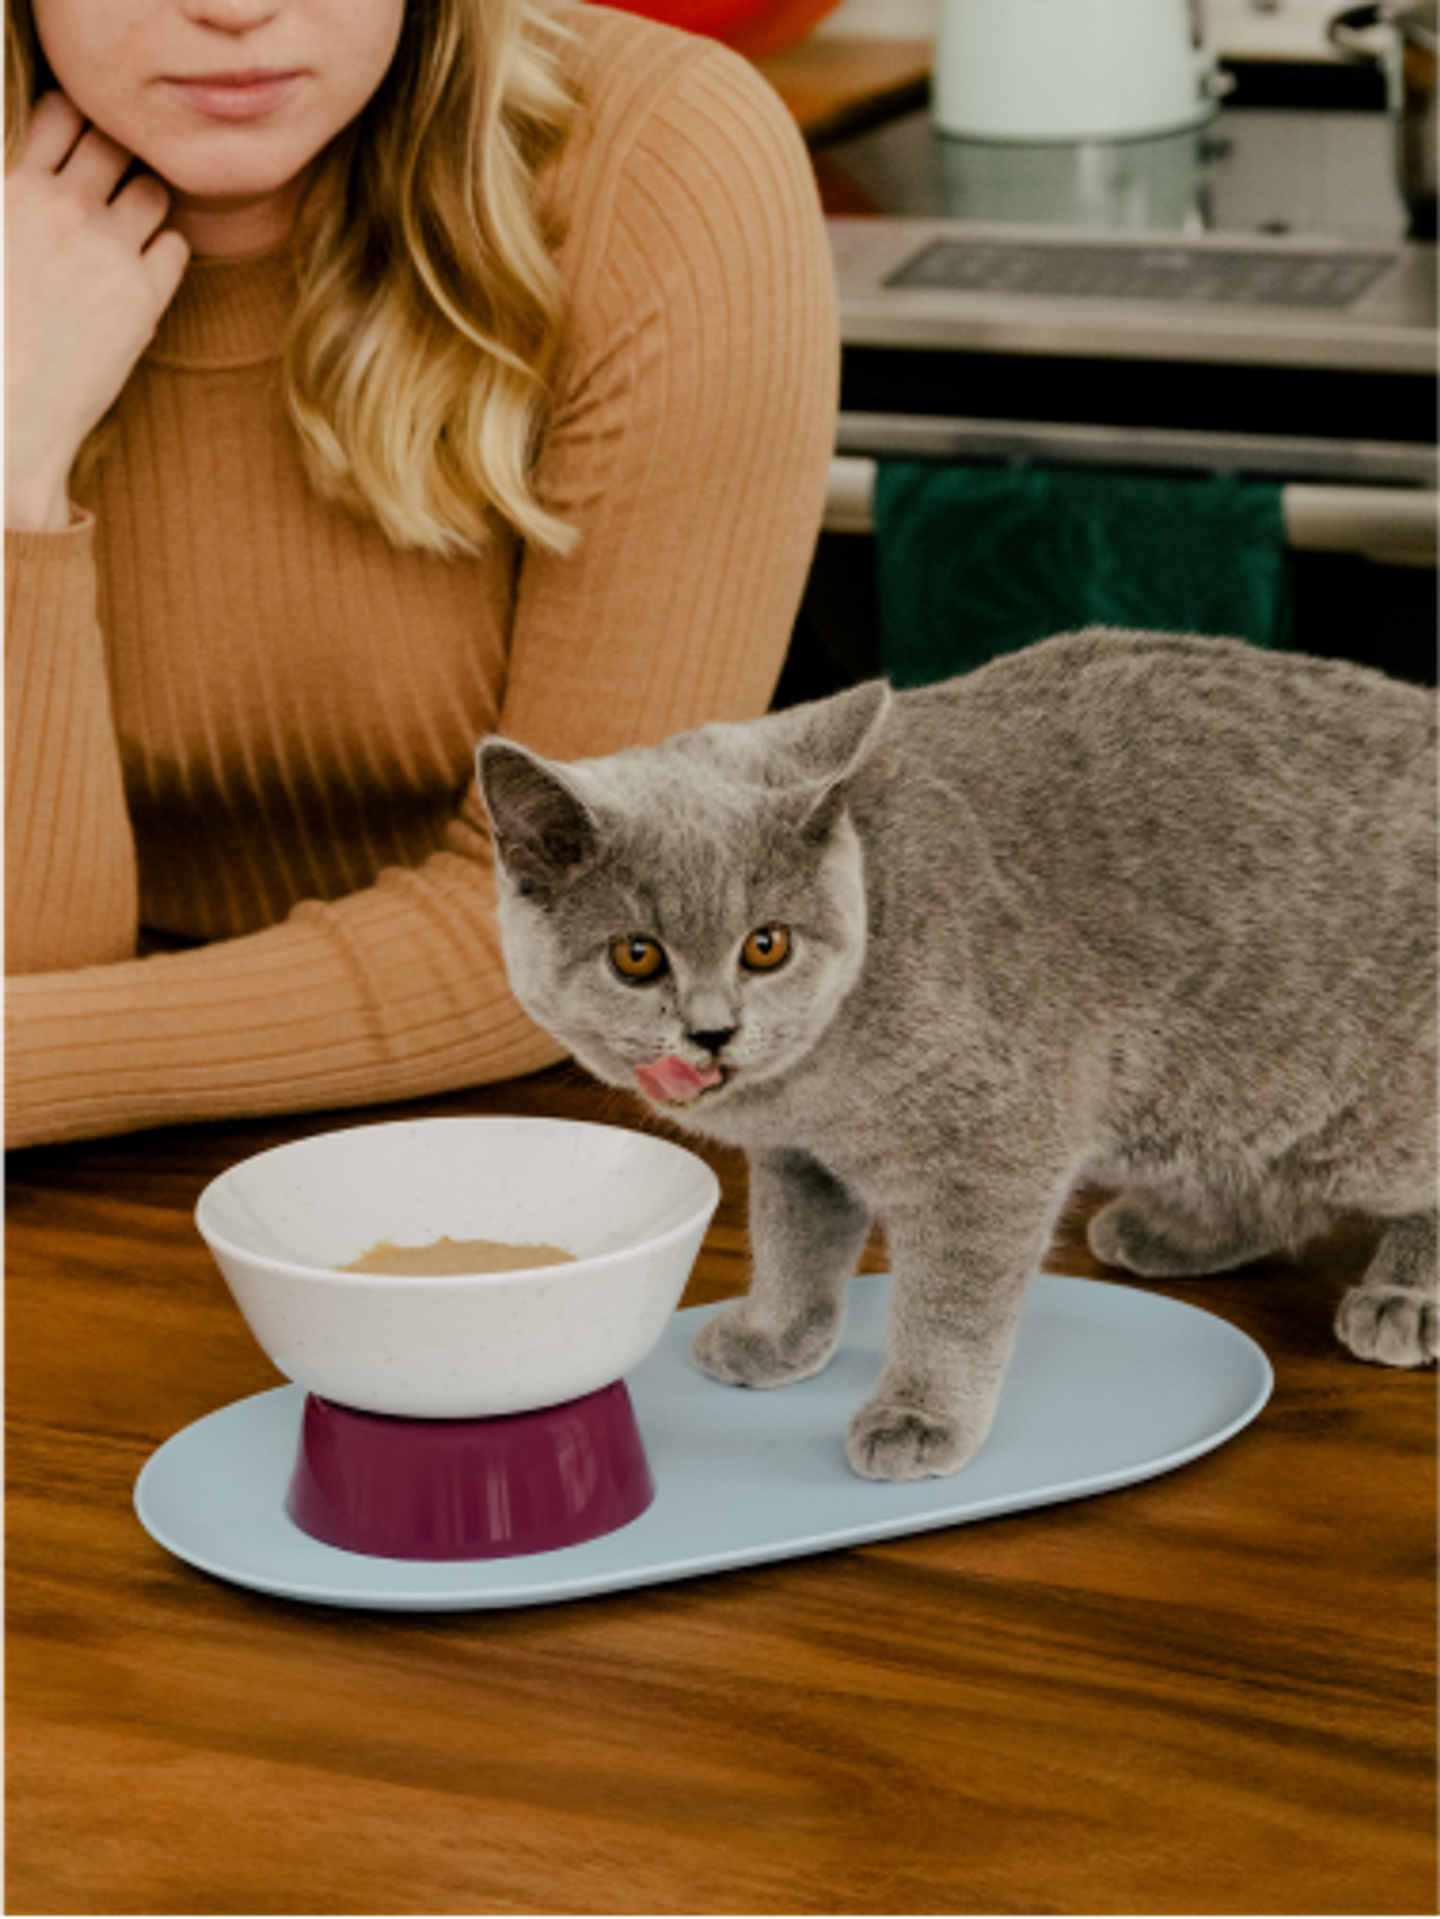 A gray cat licks it's lips in front of a Cat Person Mesa Bowl filled with Cat Person wet food